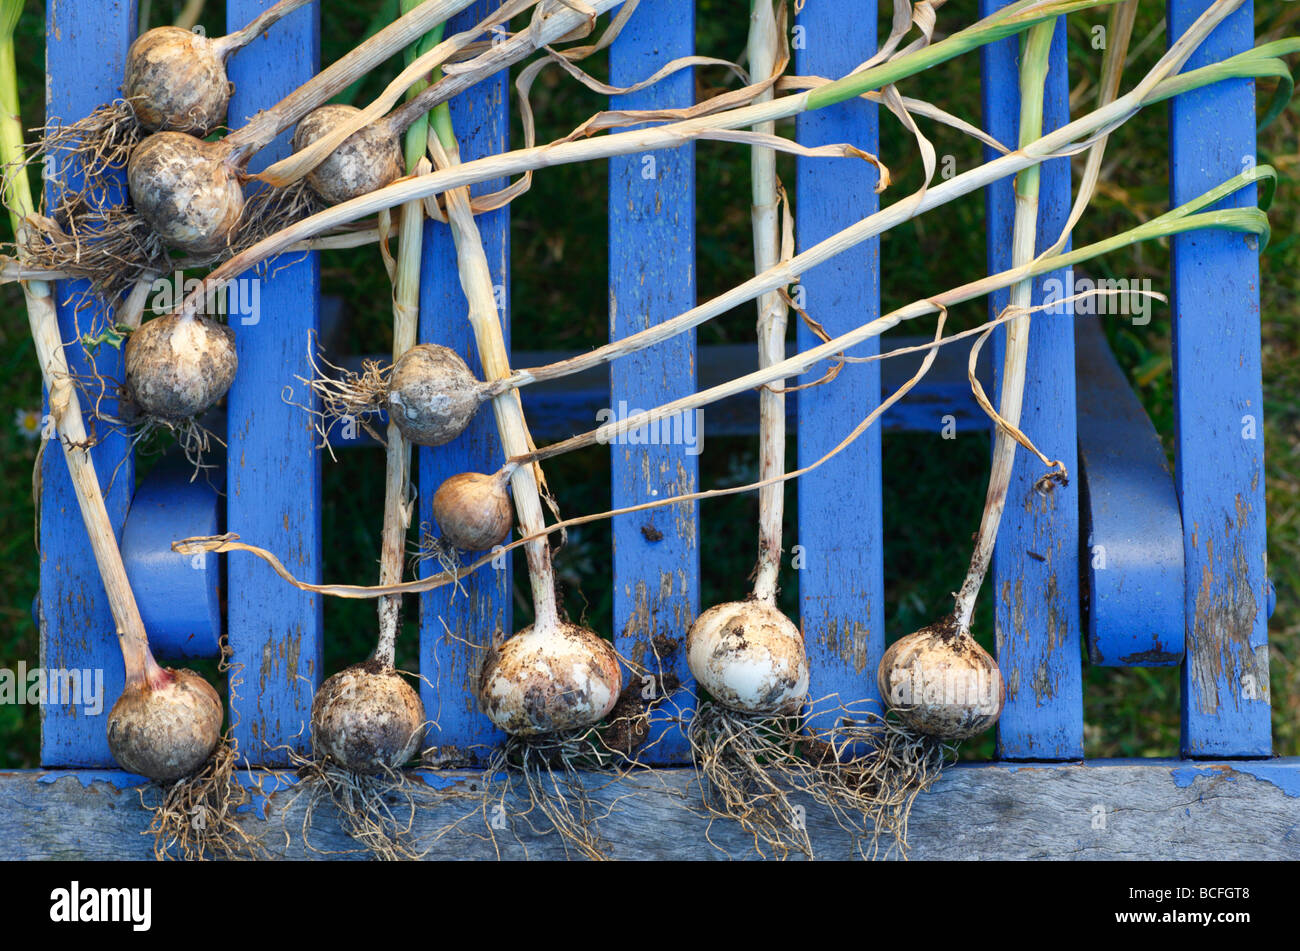 Freshly picked homegrown garlic bulbs laid out to dry. Stock Photo